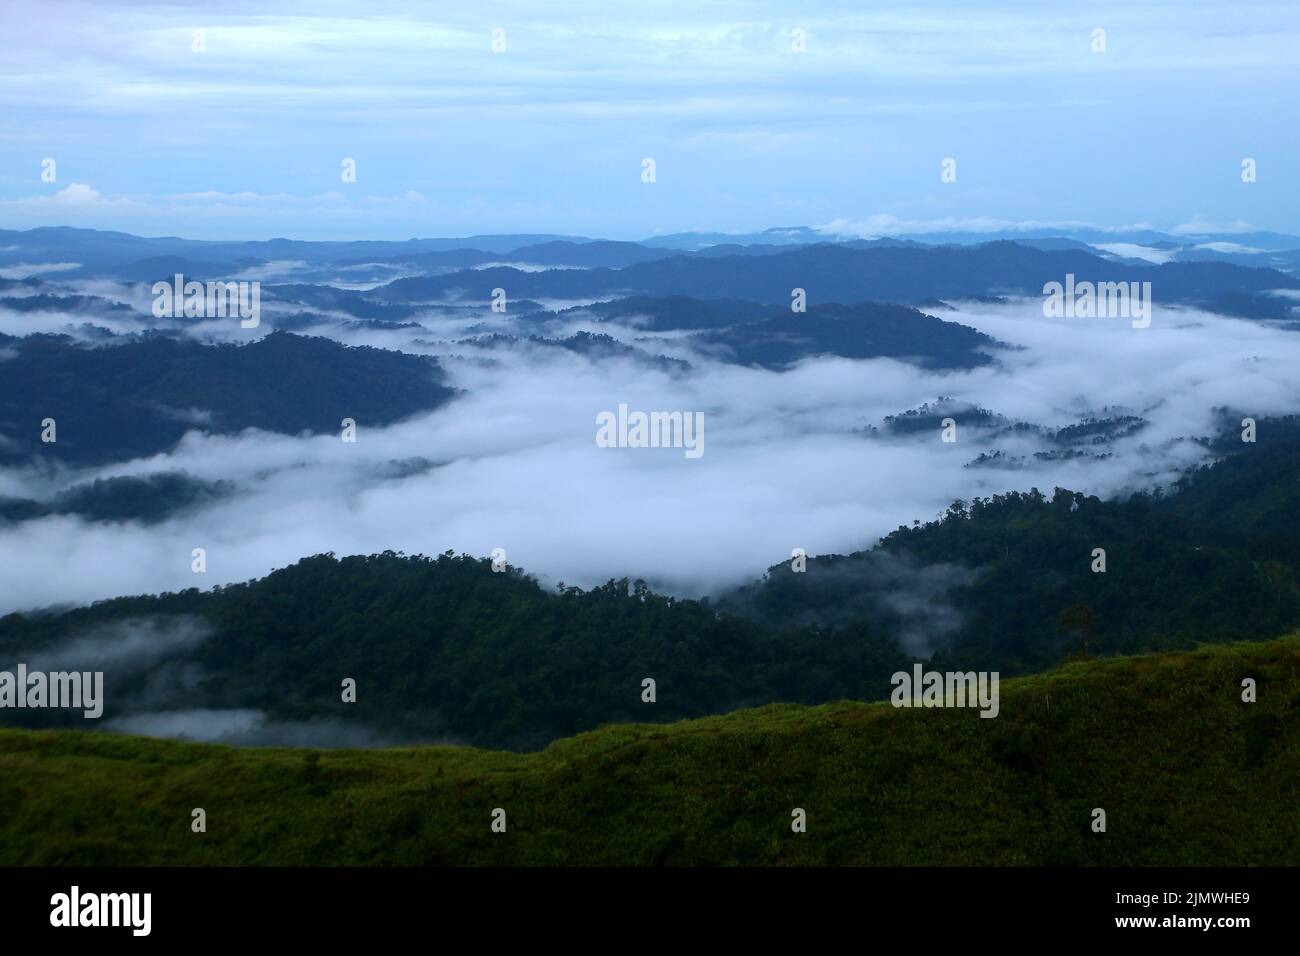 landscape photo, misty mountain hills in the morning Stock Photo